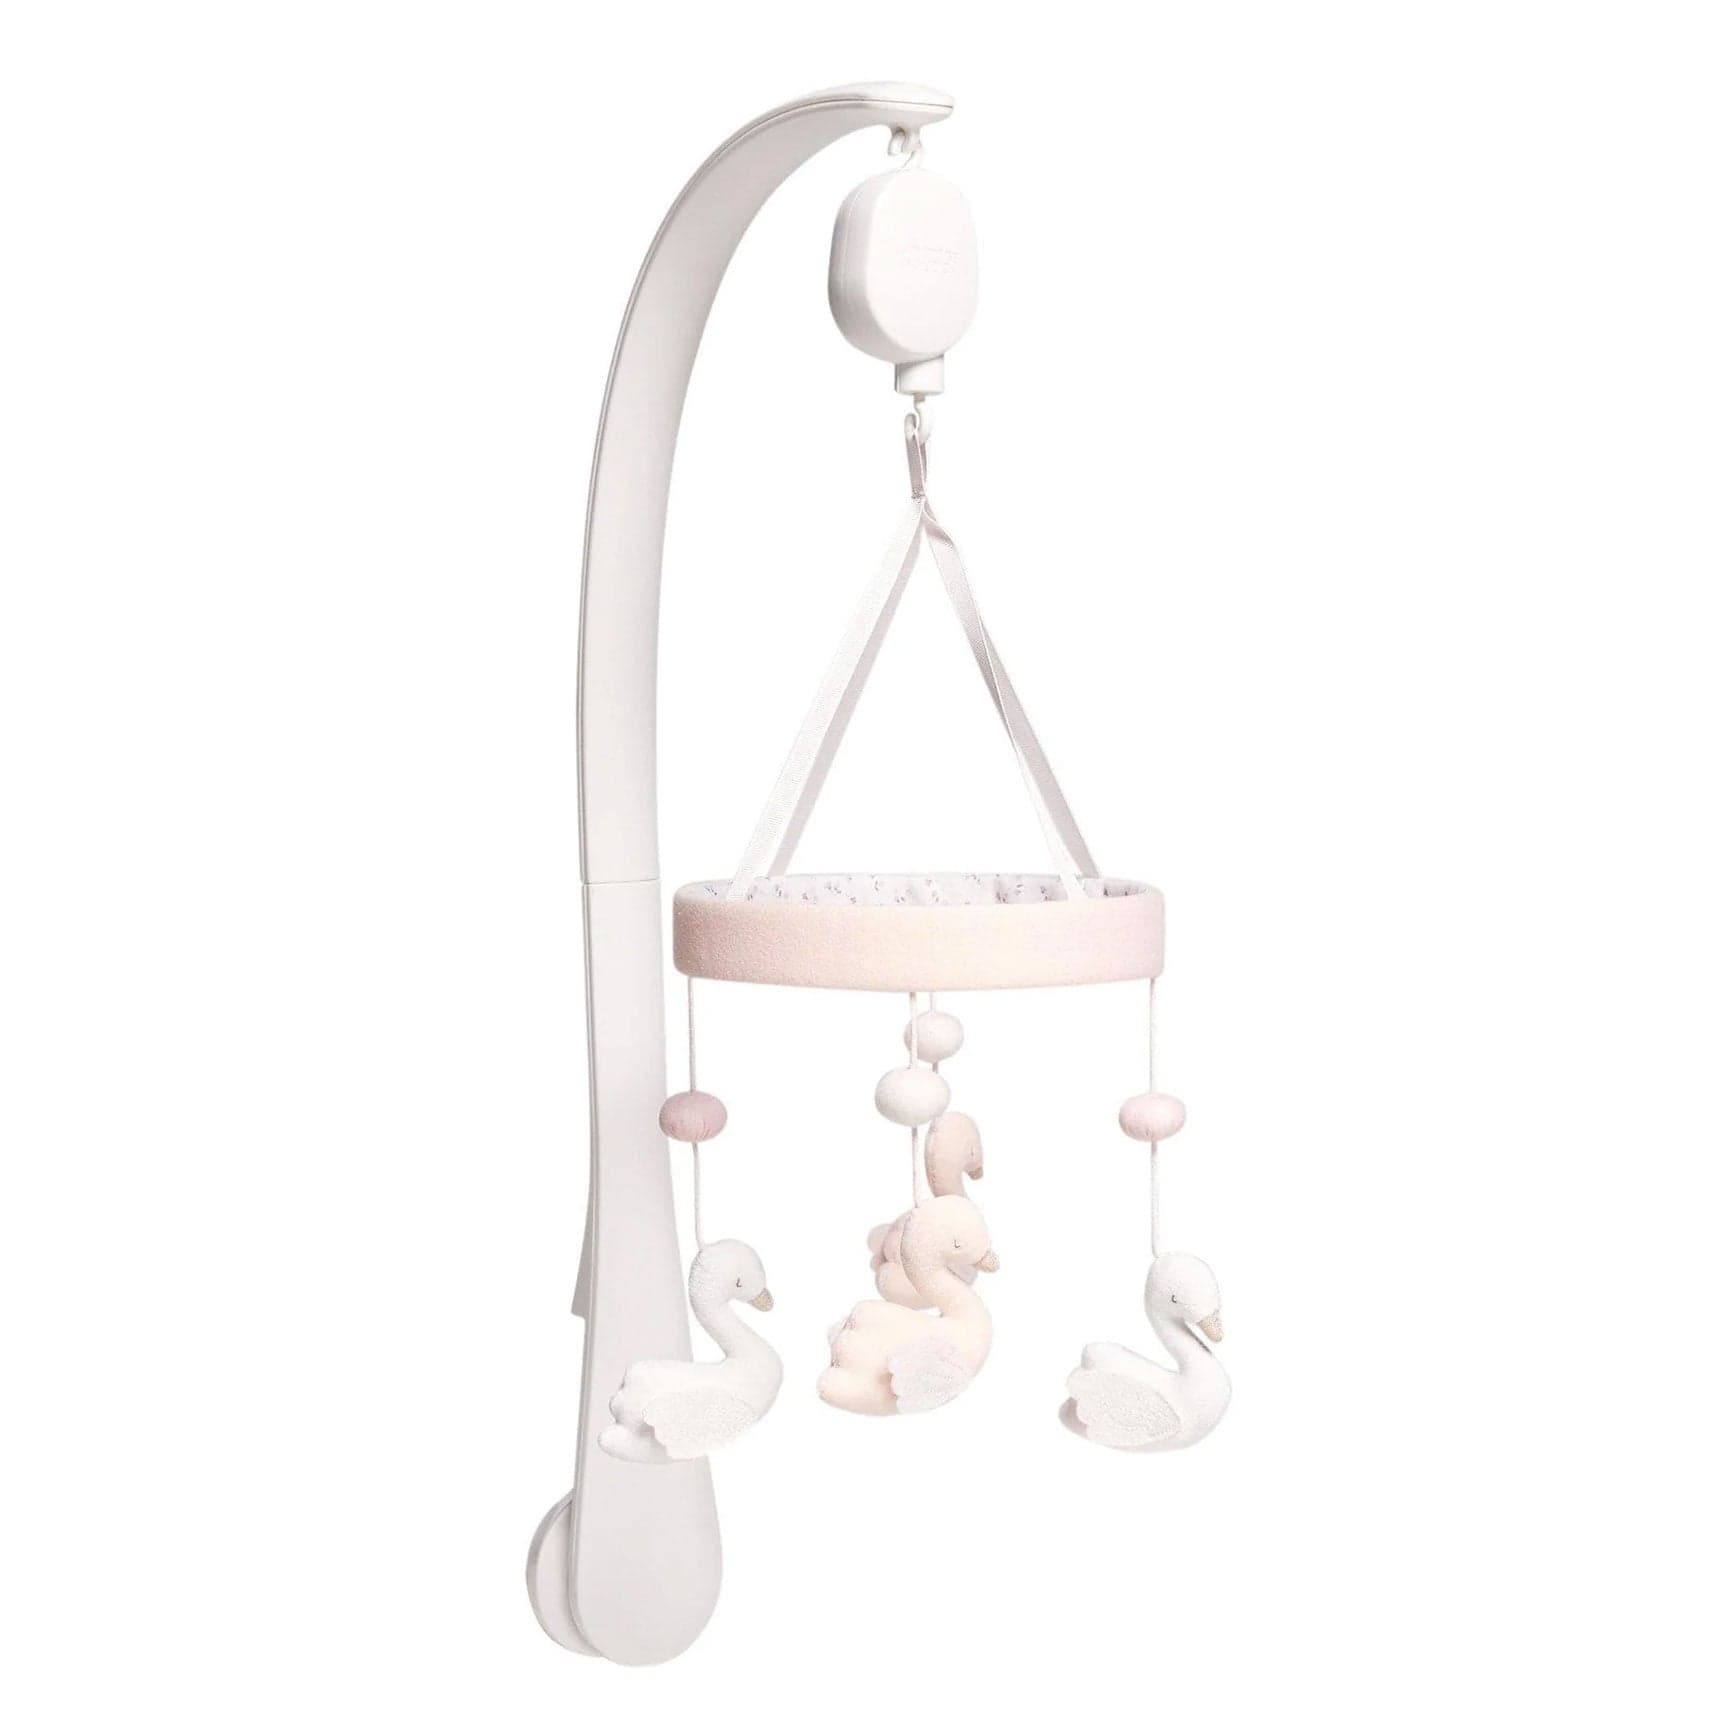 Mamas & Papas Welcome to the World Cot Musical Mobile in Floral Musical Mobiles 7560WW301